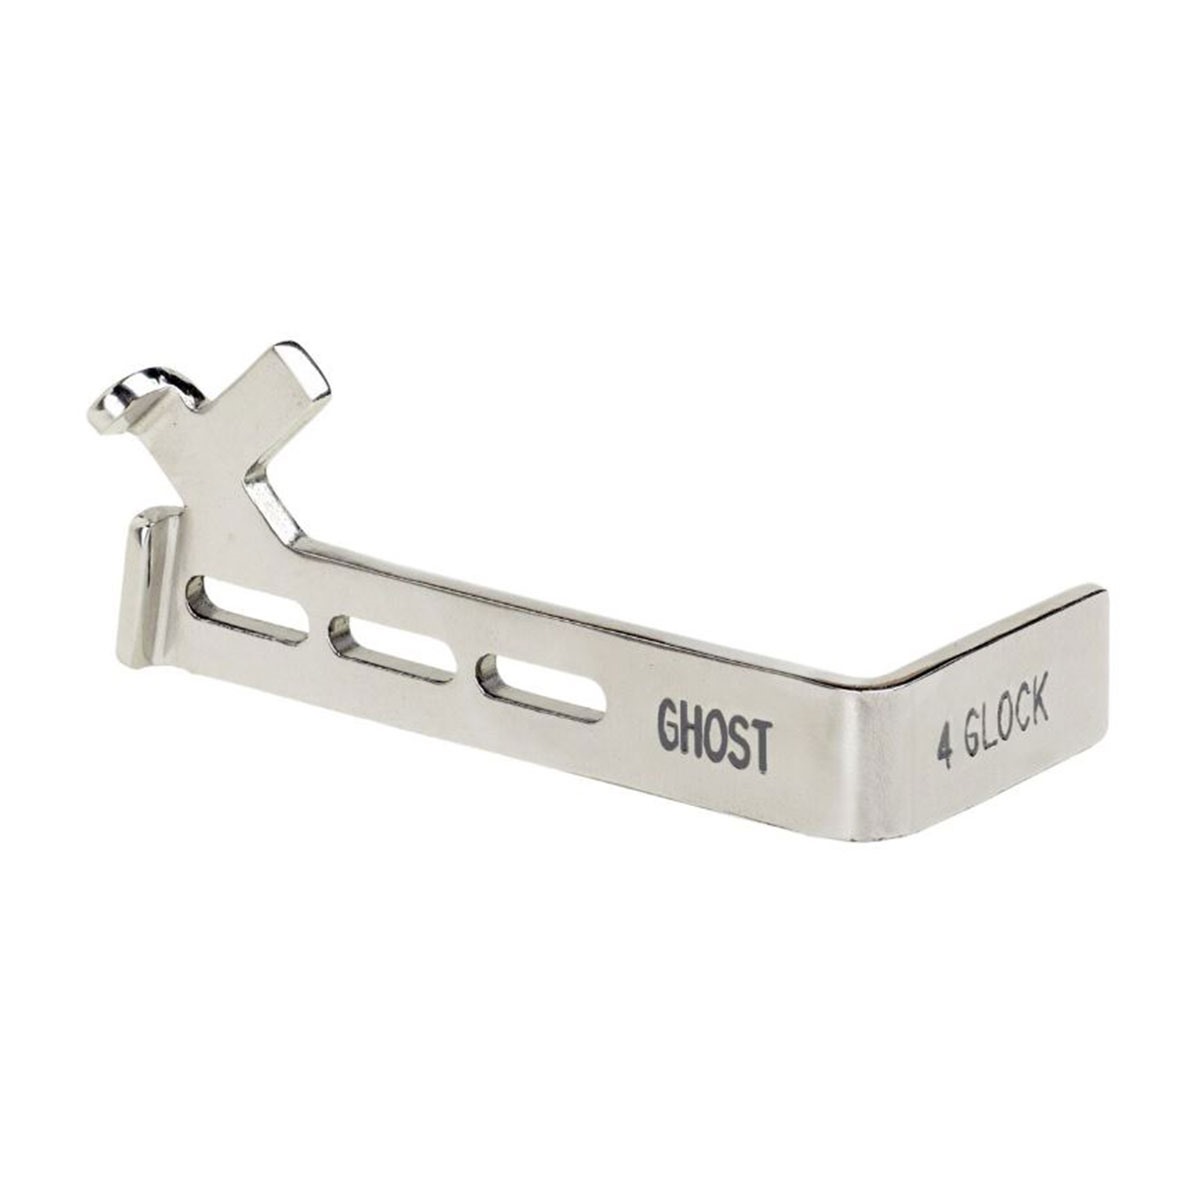 GHOST GHOST ROCKET 3.5 TRIGGER CONNECTOR | Brownells